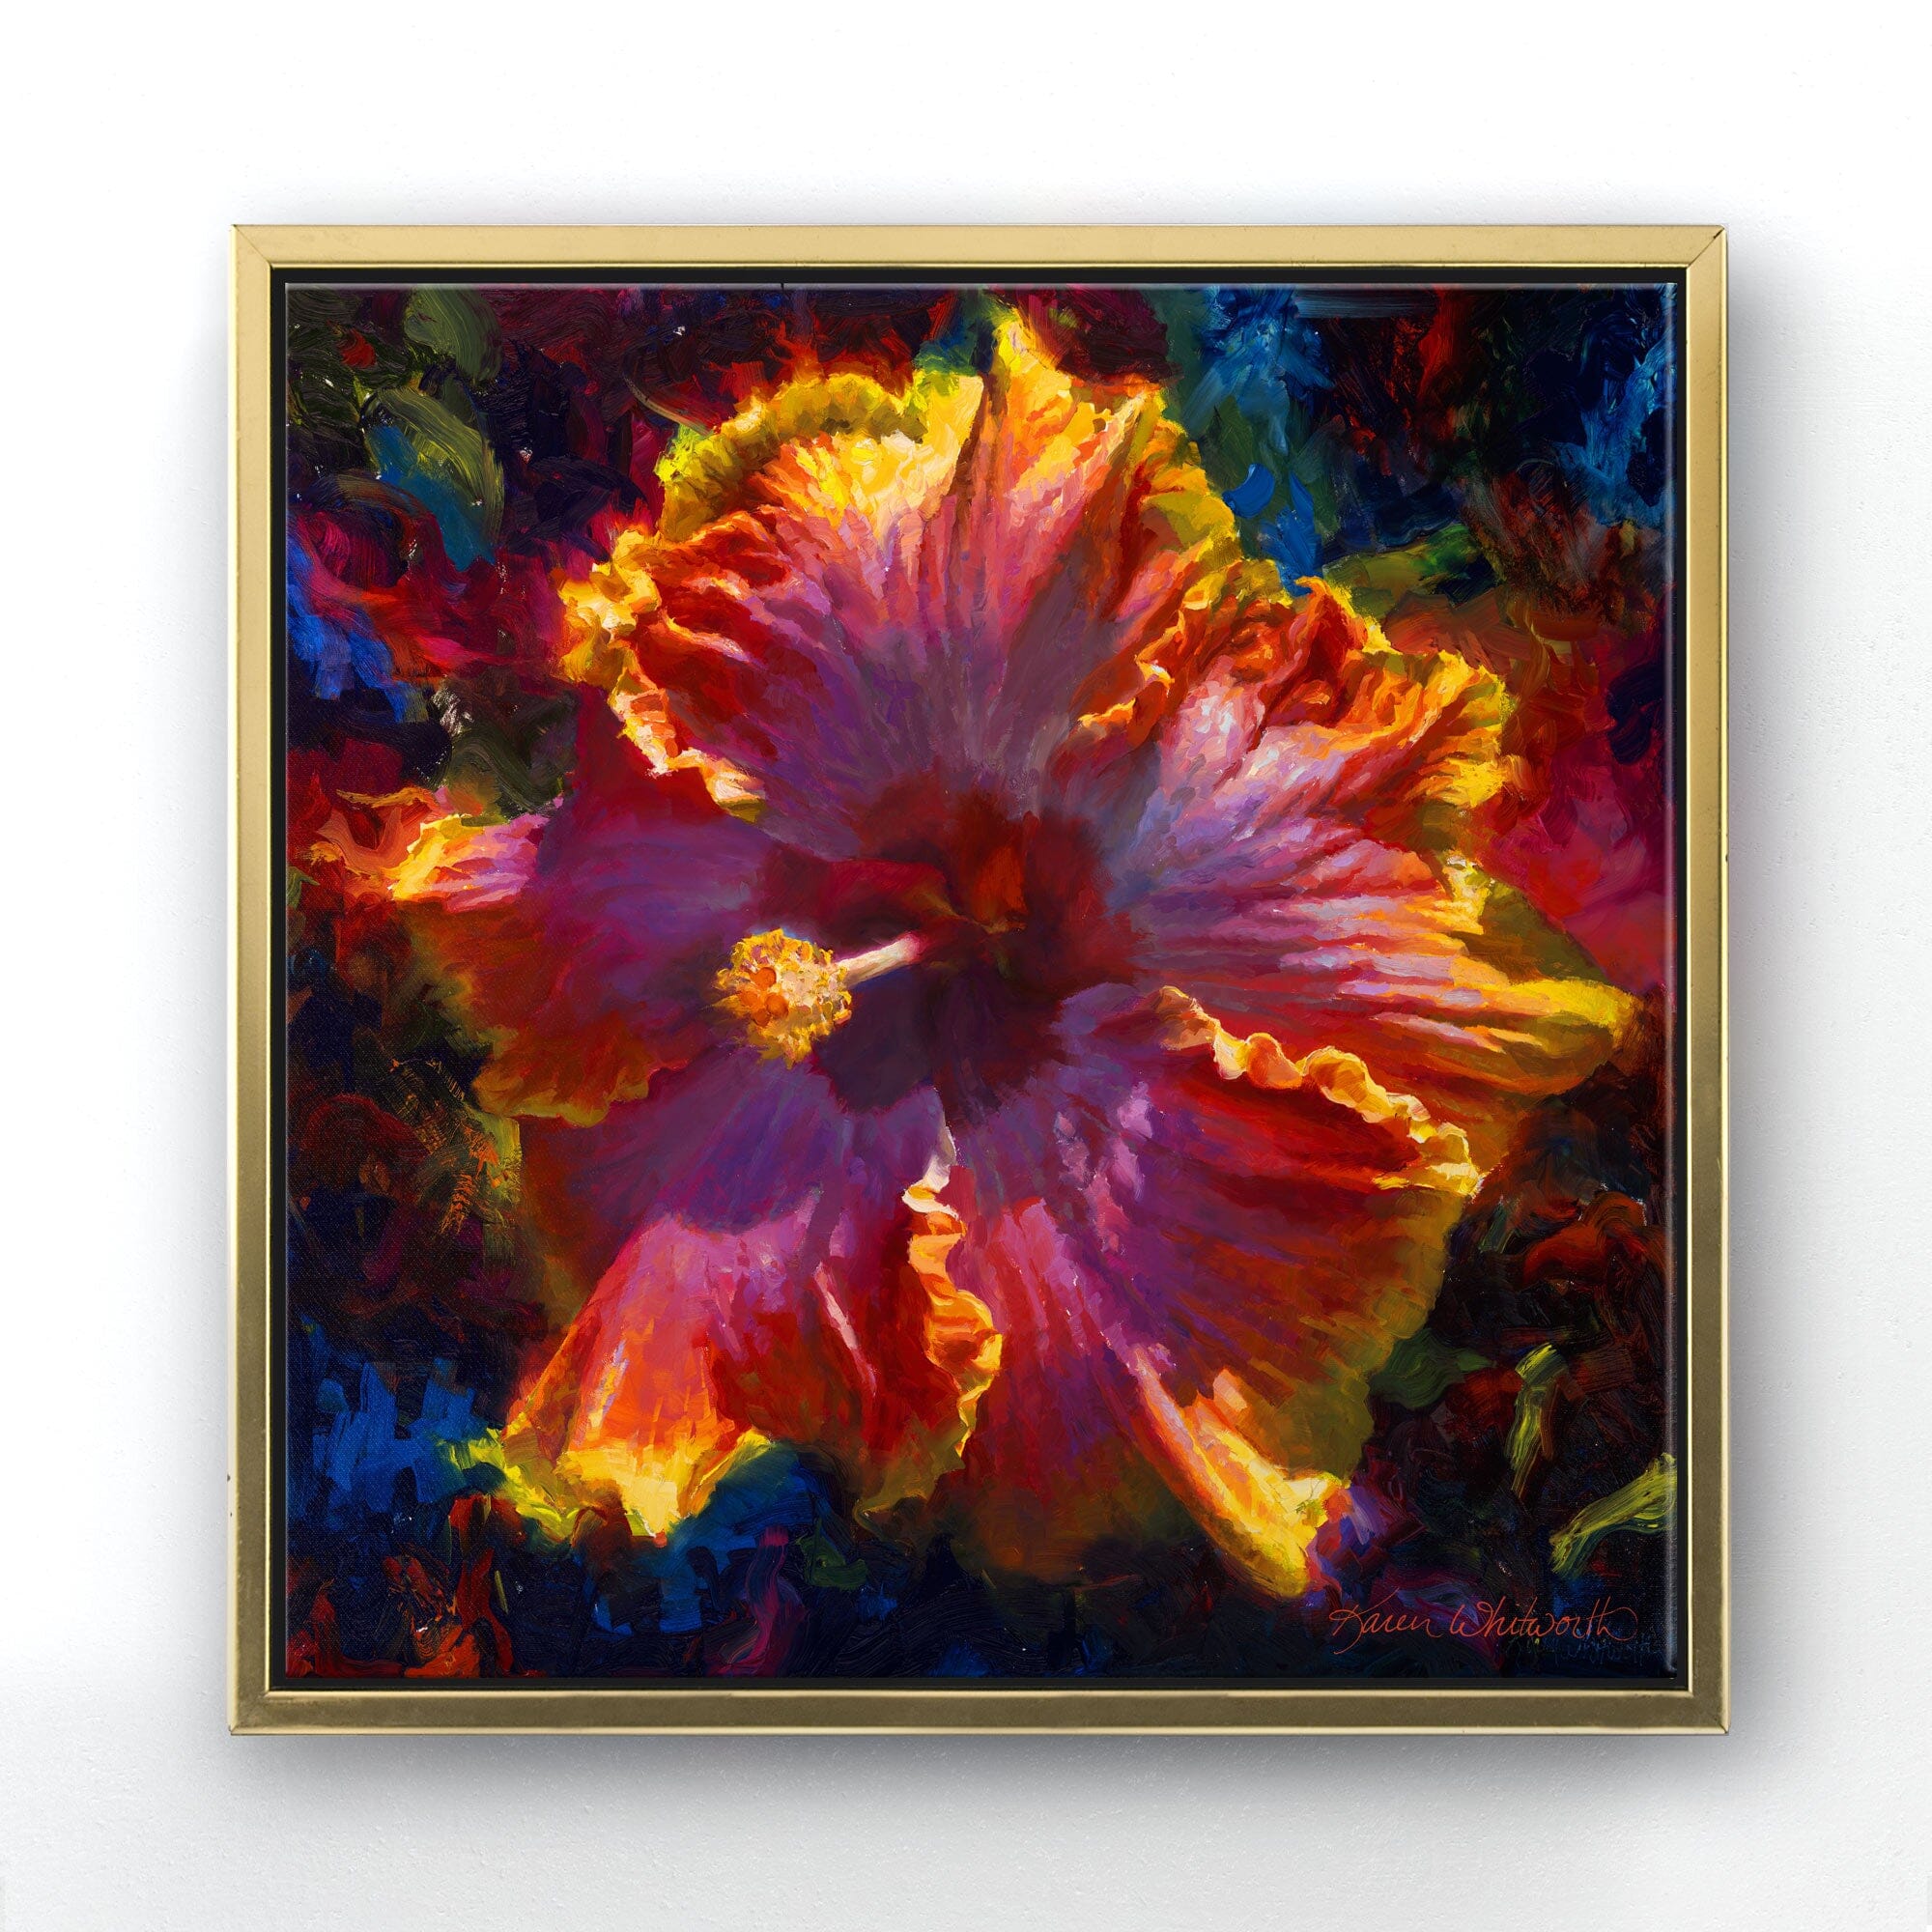 Square canvas wall art in a contemporary gold minimalist frame. The artwork is a painting by Karen Whitworth of a large Hawaiian hibiscus flower, painted in a lively impressionistic style. Vibrant colors and brushstrokes swirl around the flower in a dark background. The painting is hanging on a white wall.